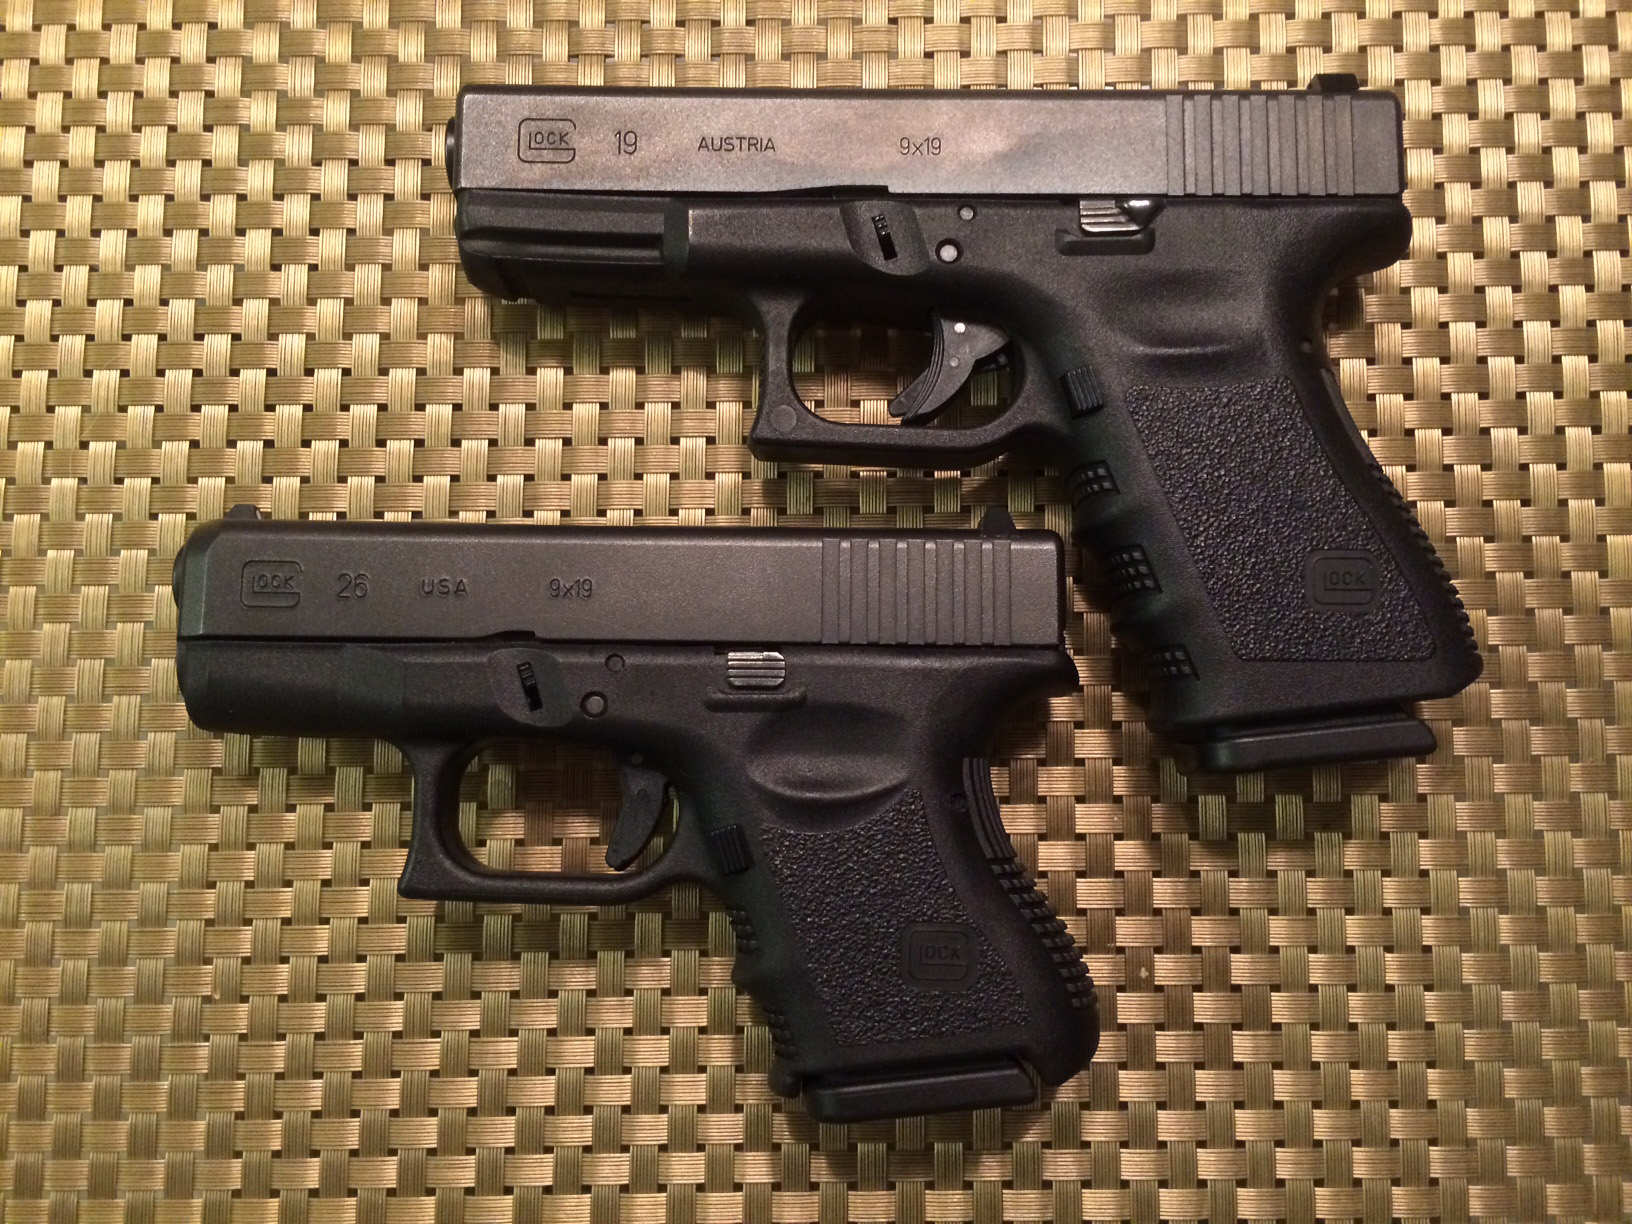 Glock Compact vs Sub-Compact for Summer Carry